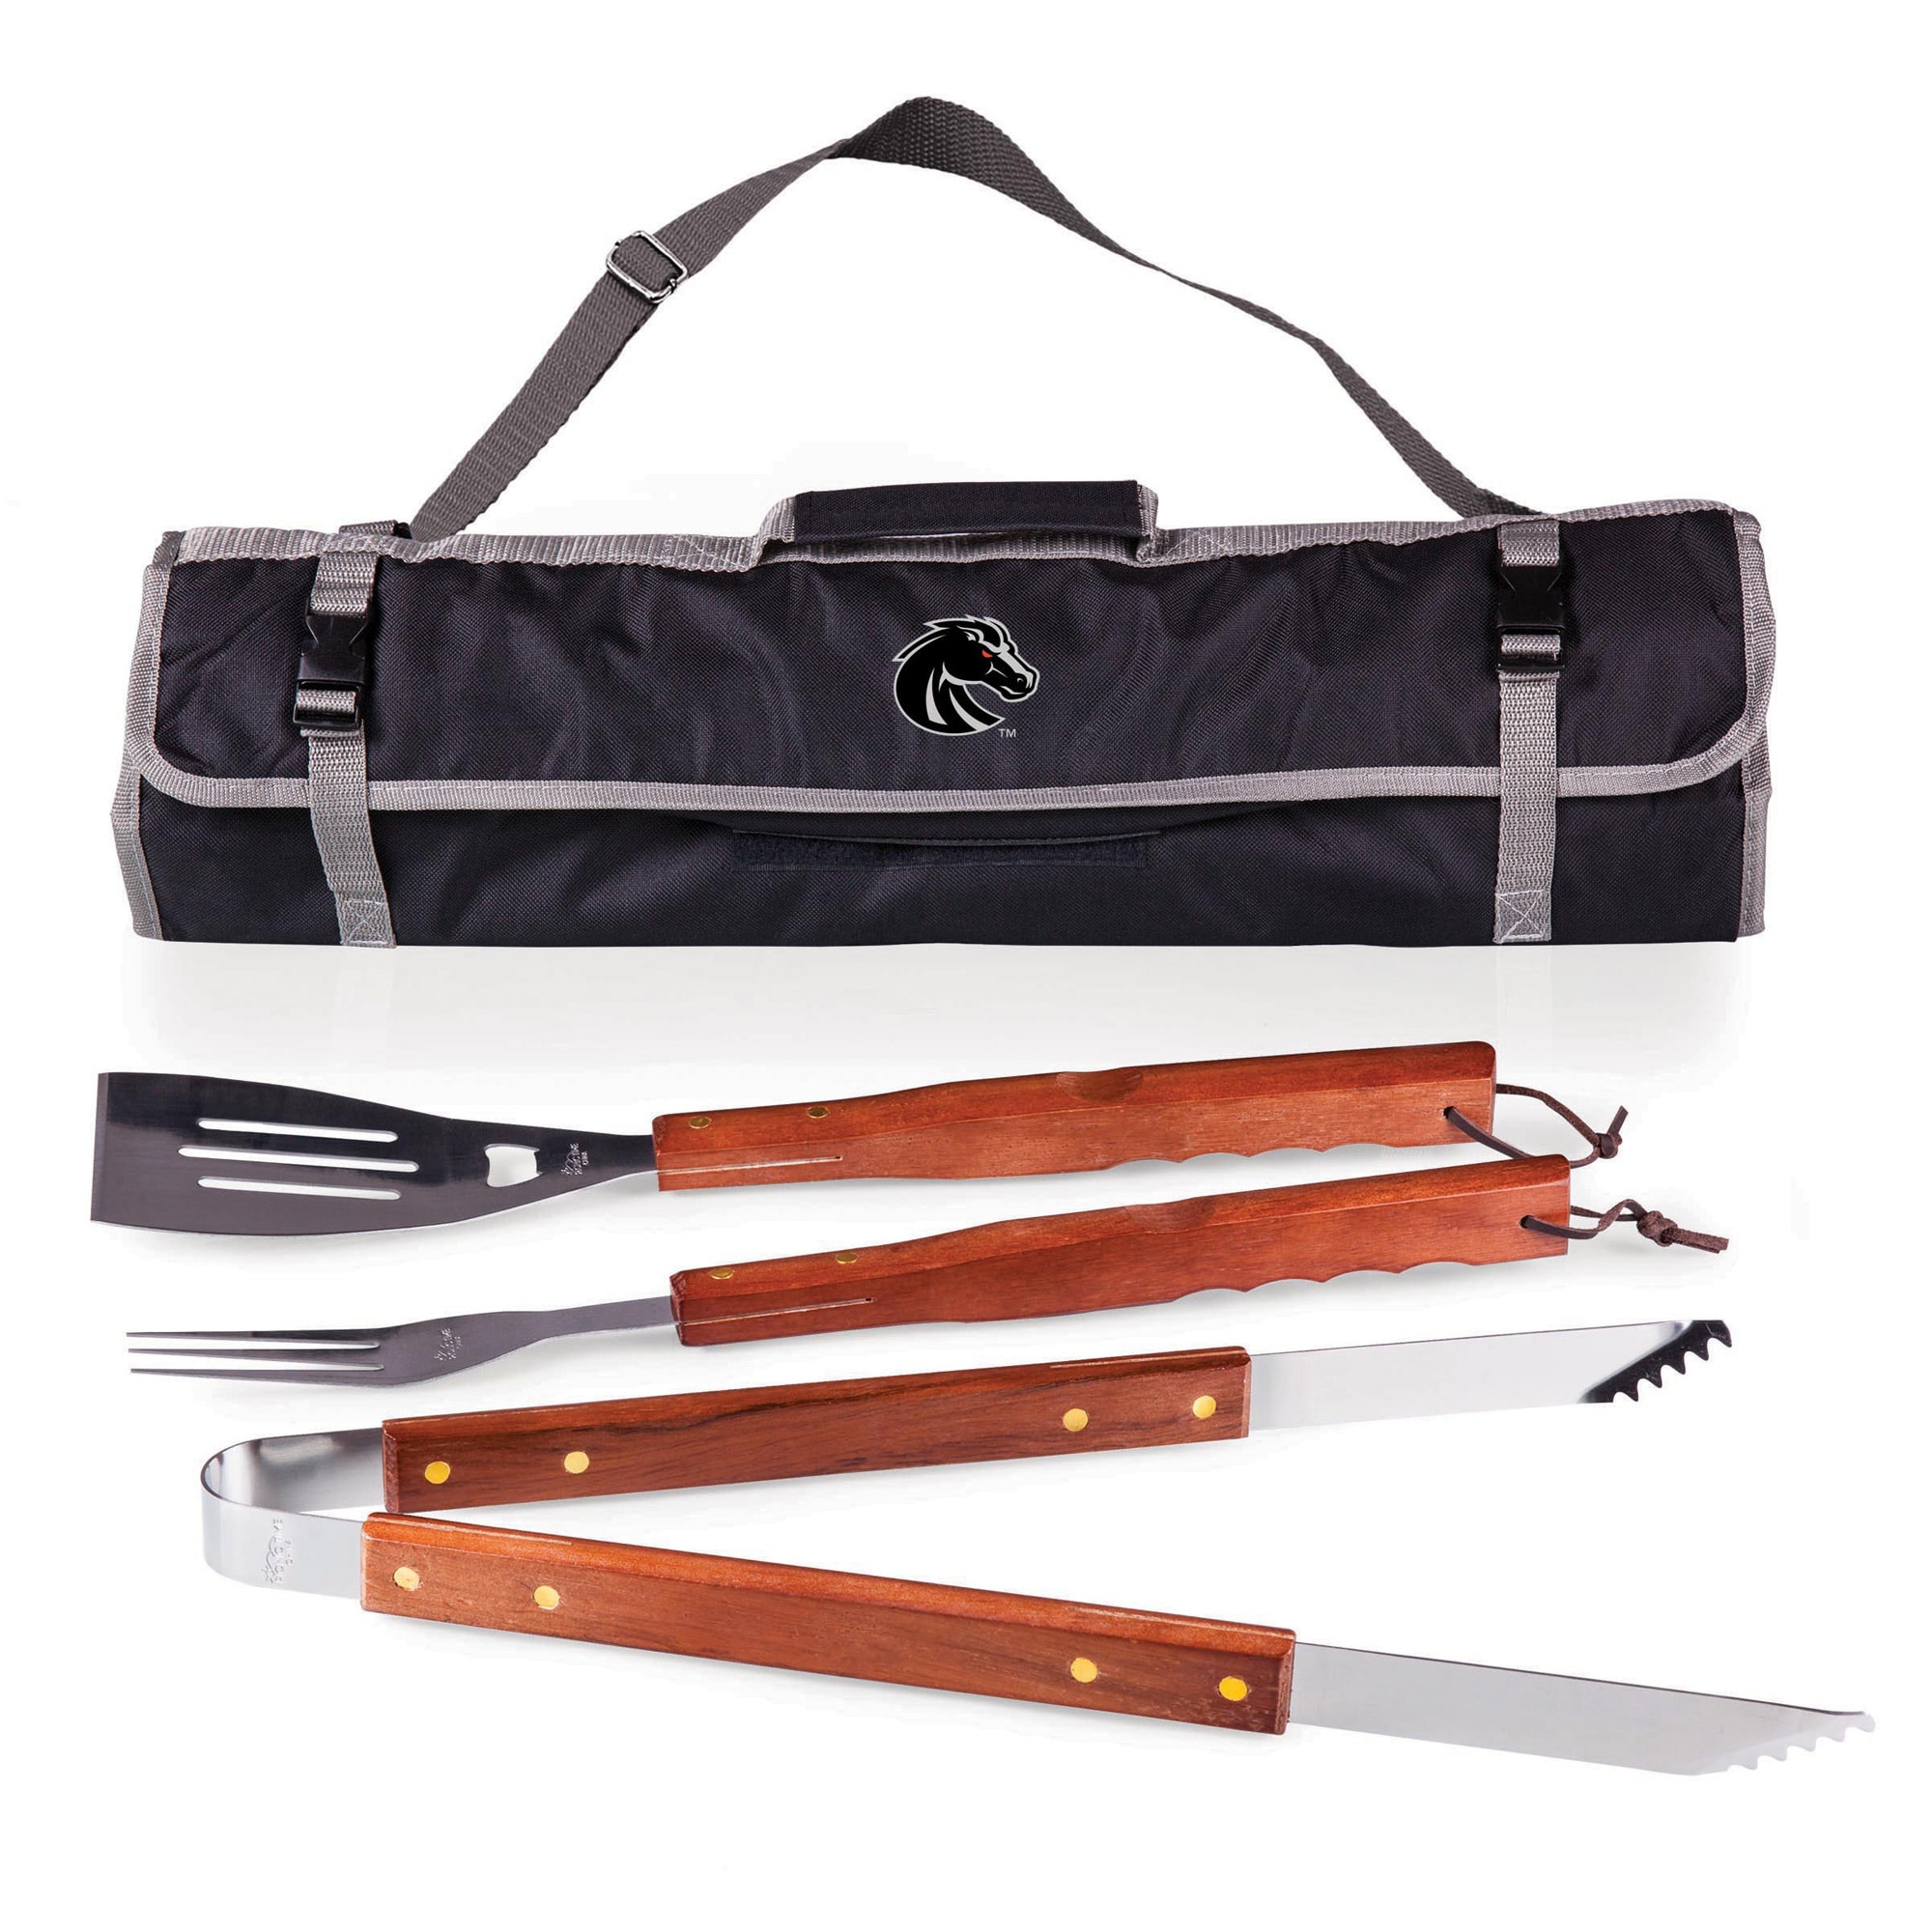 Boise State Broncos 3-Piece BBQ Tote & Grill Set - image 1 of 2